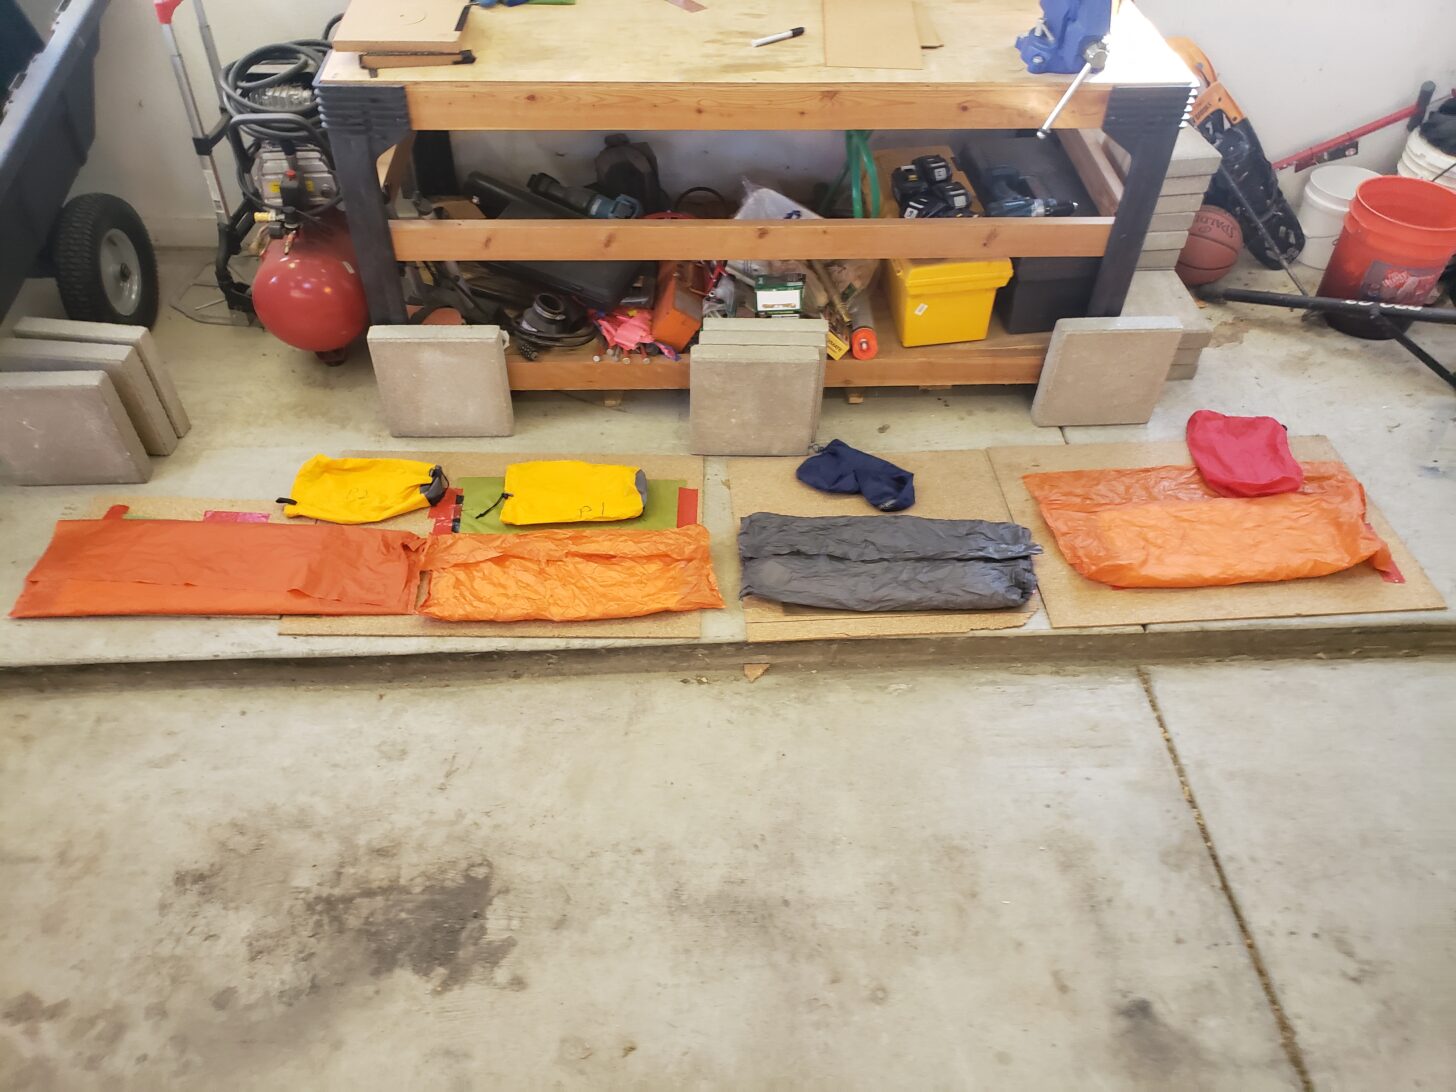 a garage workshop with insulation samples inside stuff sacks and with paving stones for crushing nearby.